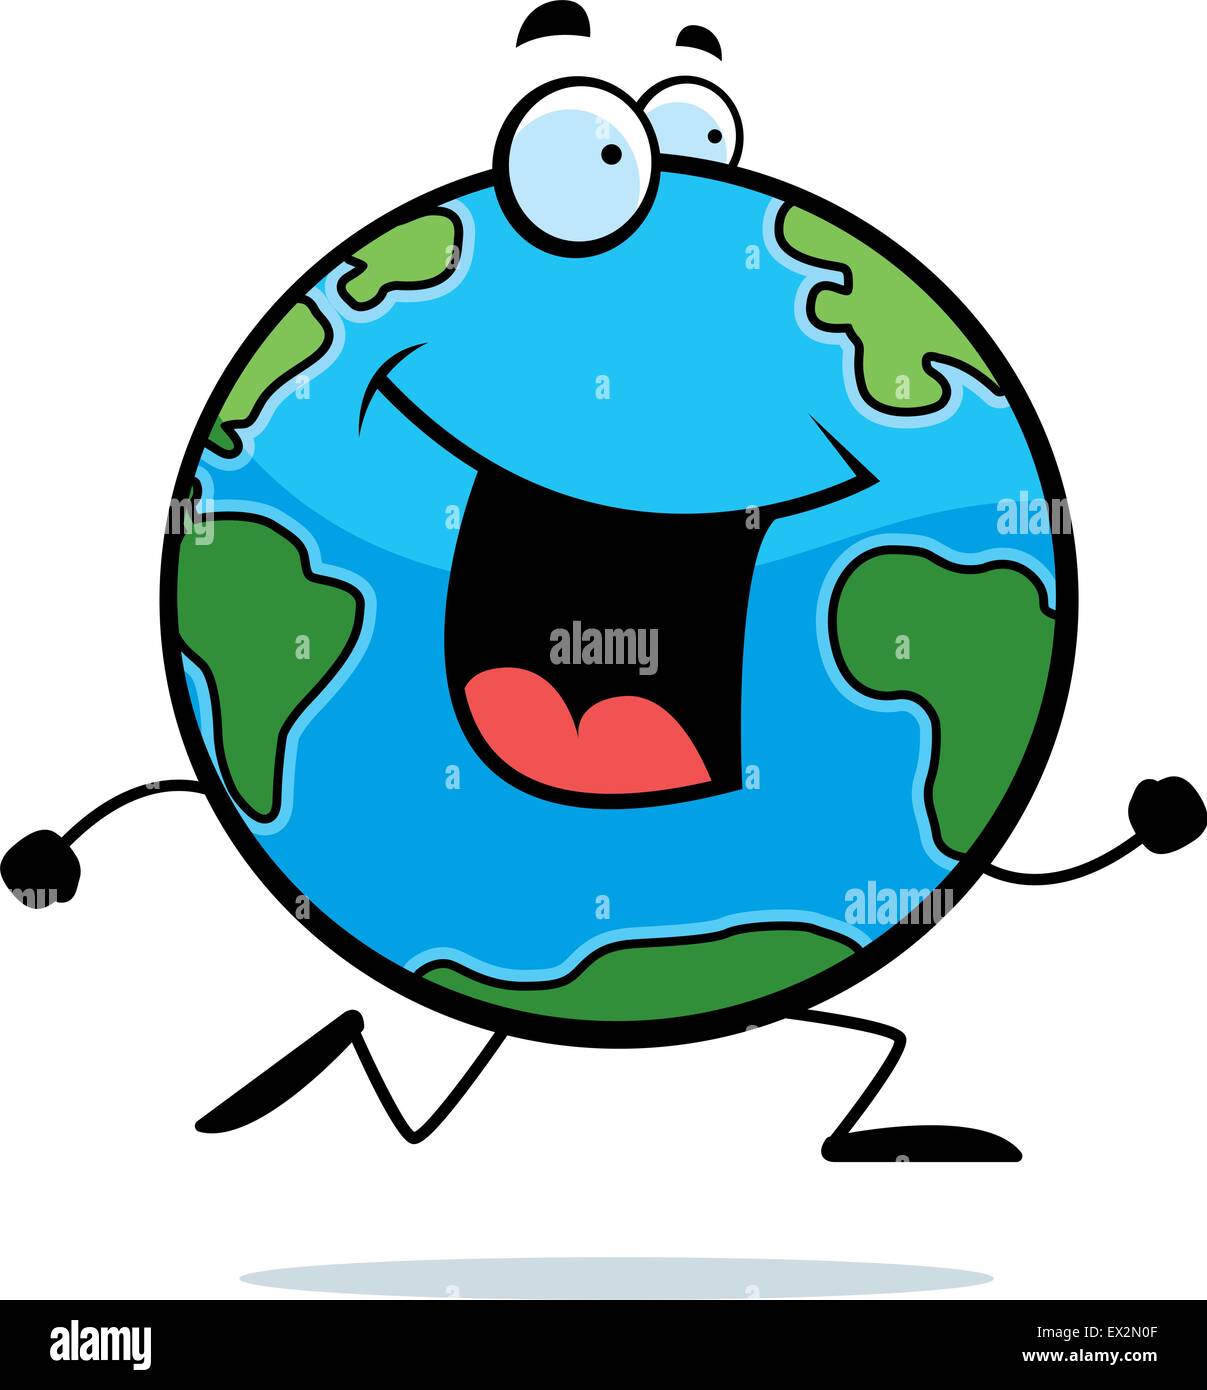 A happy cartoon planet earth running and smiling. Stock Vector